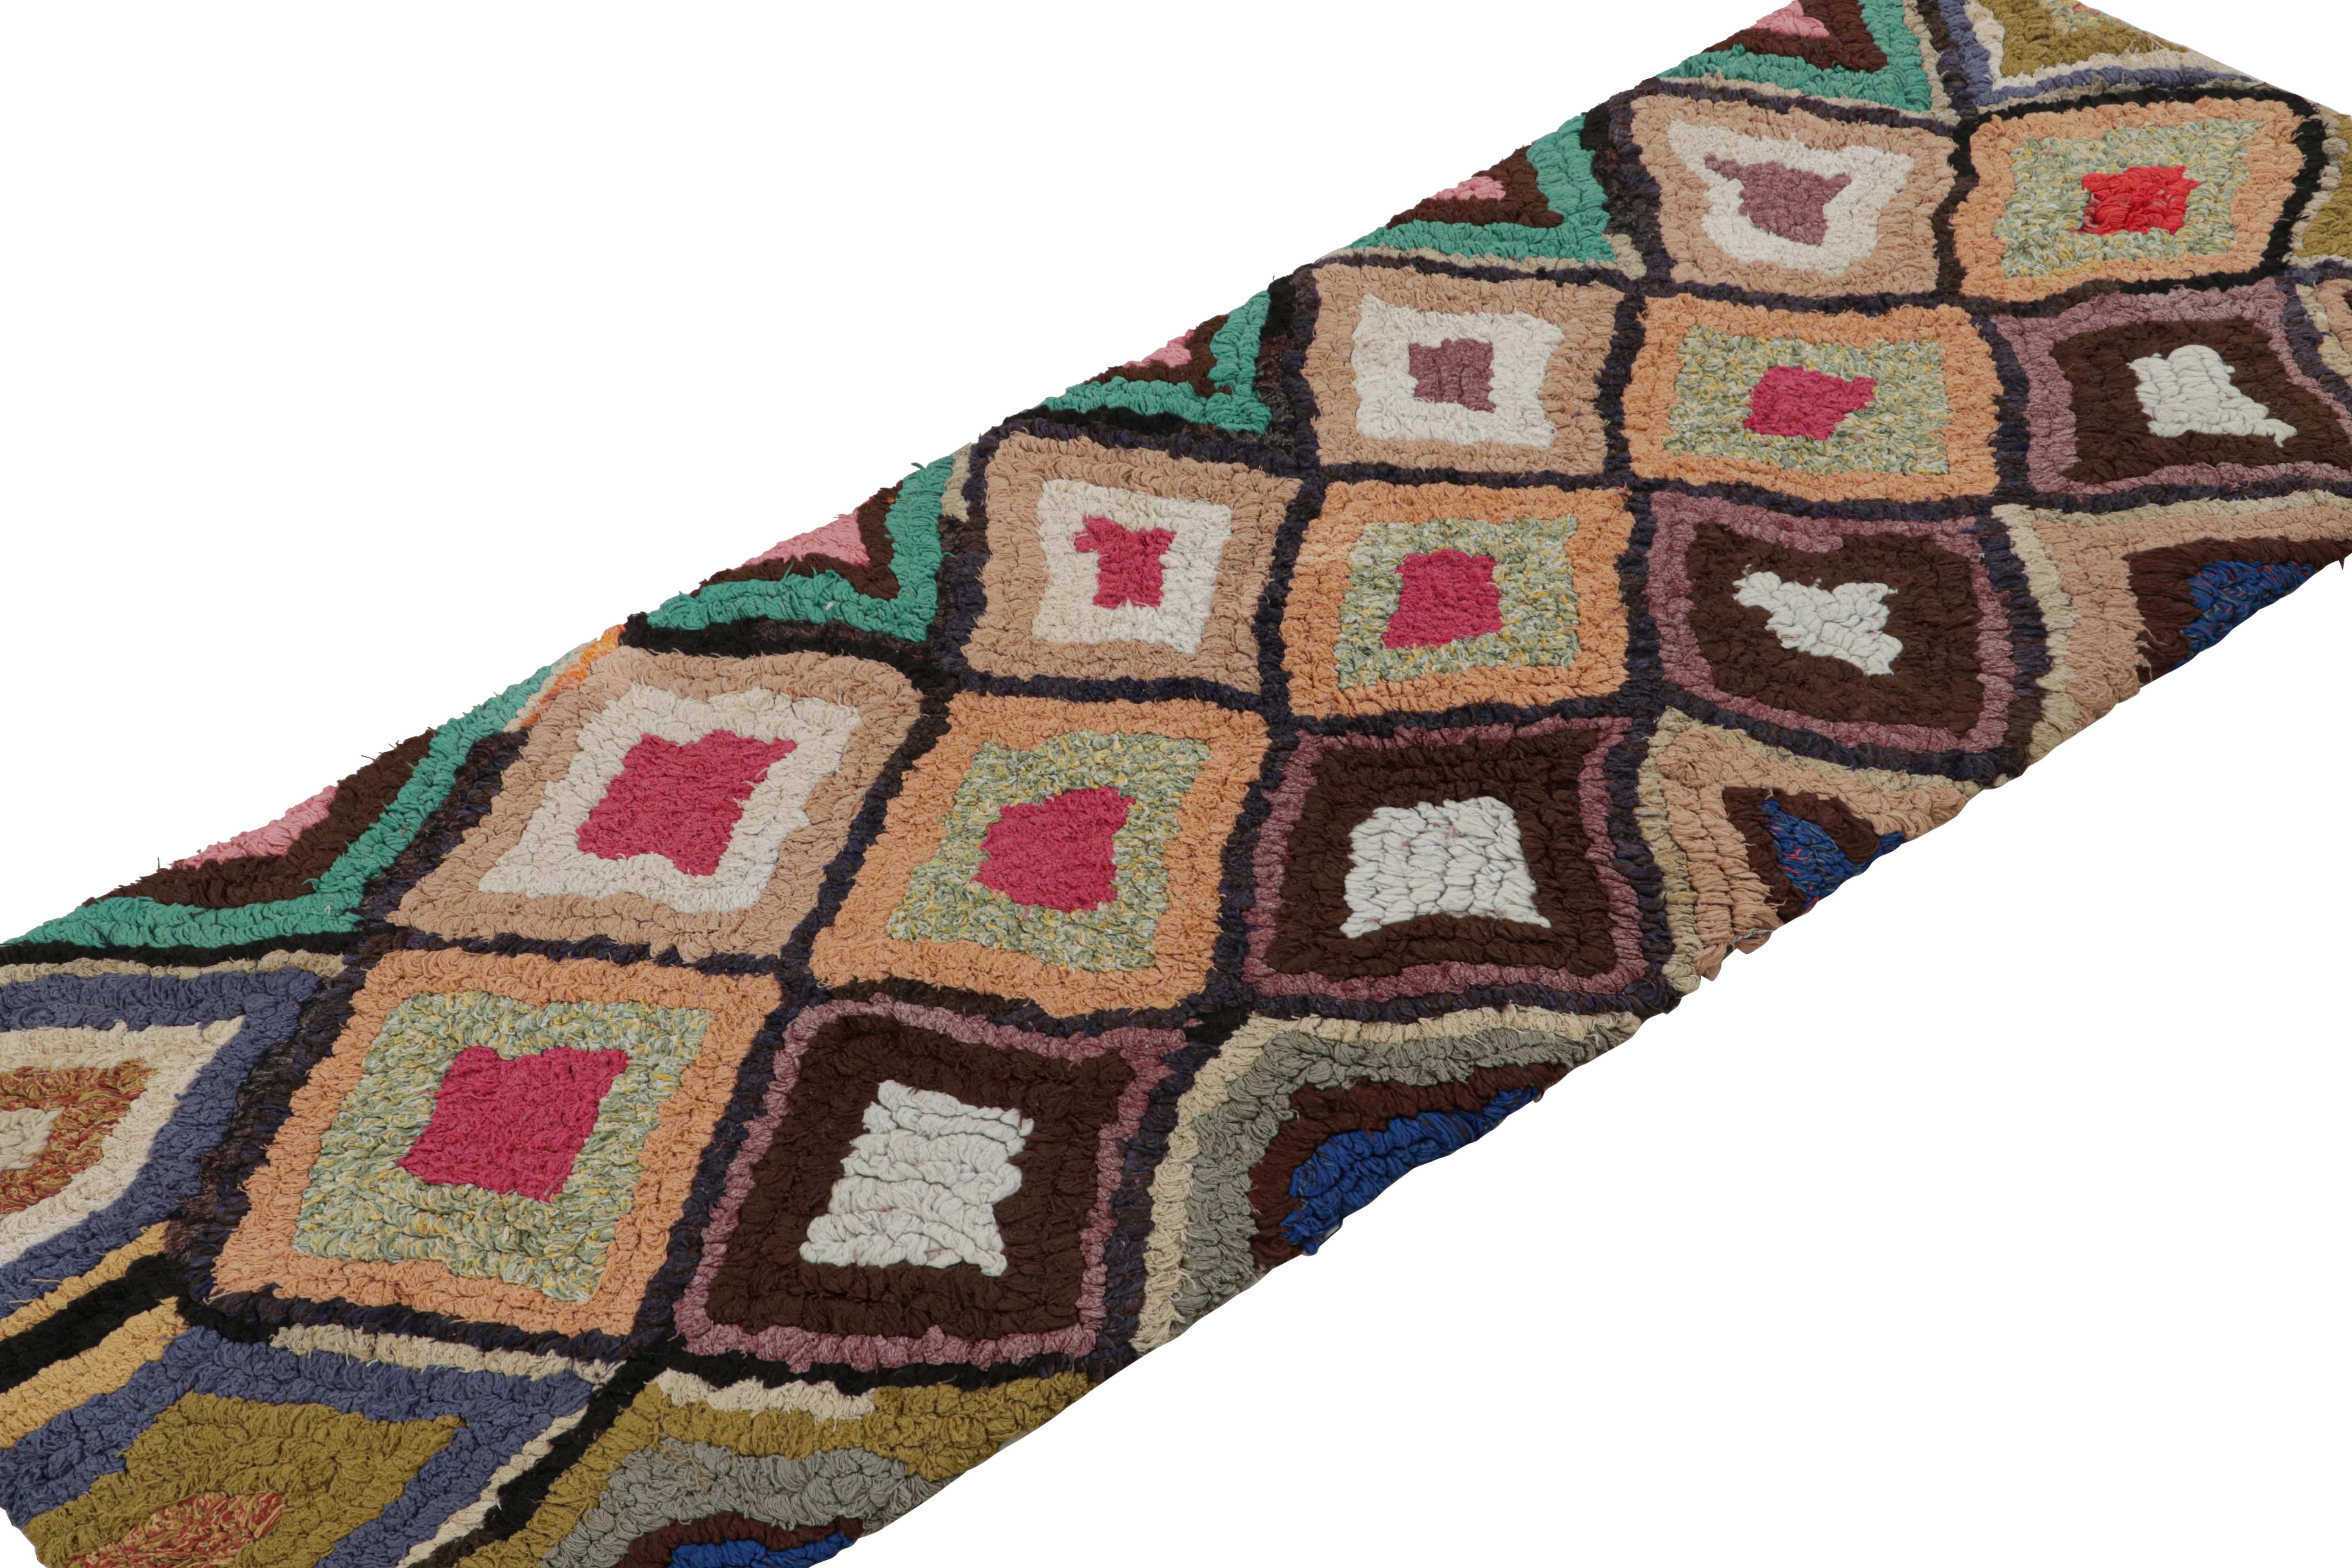 Hand-knotted in wool and cotton, circa 1950-1960, this 2x6 vintage Moroccan runner rug is believed to hail from the Azilal tribe. 

On the Design: 

This piece enjoys a lush high pile with polychromatic primitivist Berber geometric diamond or